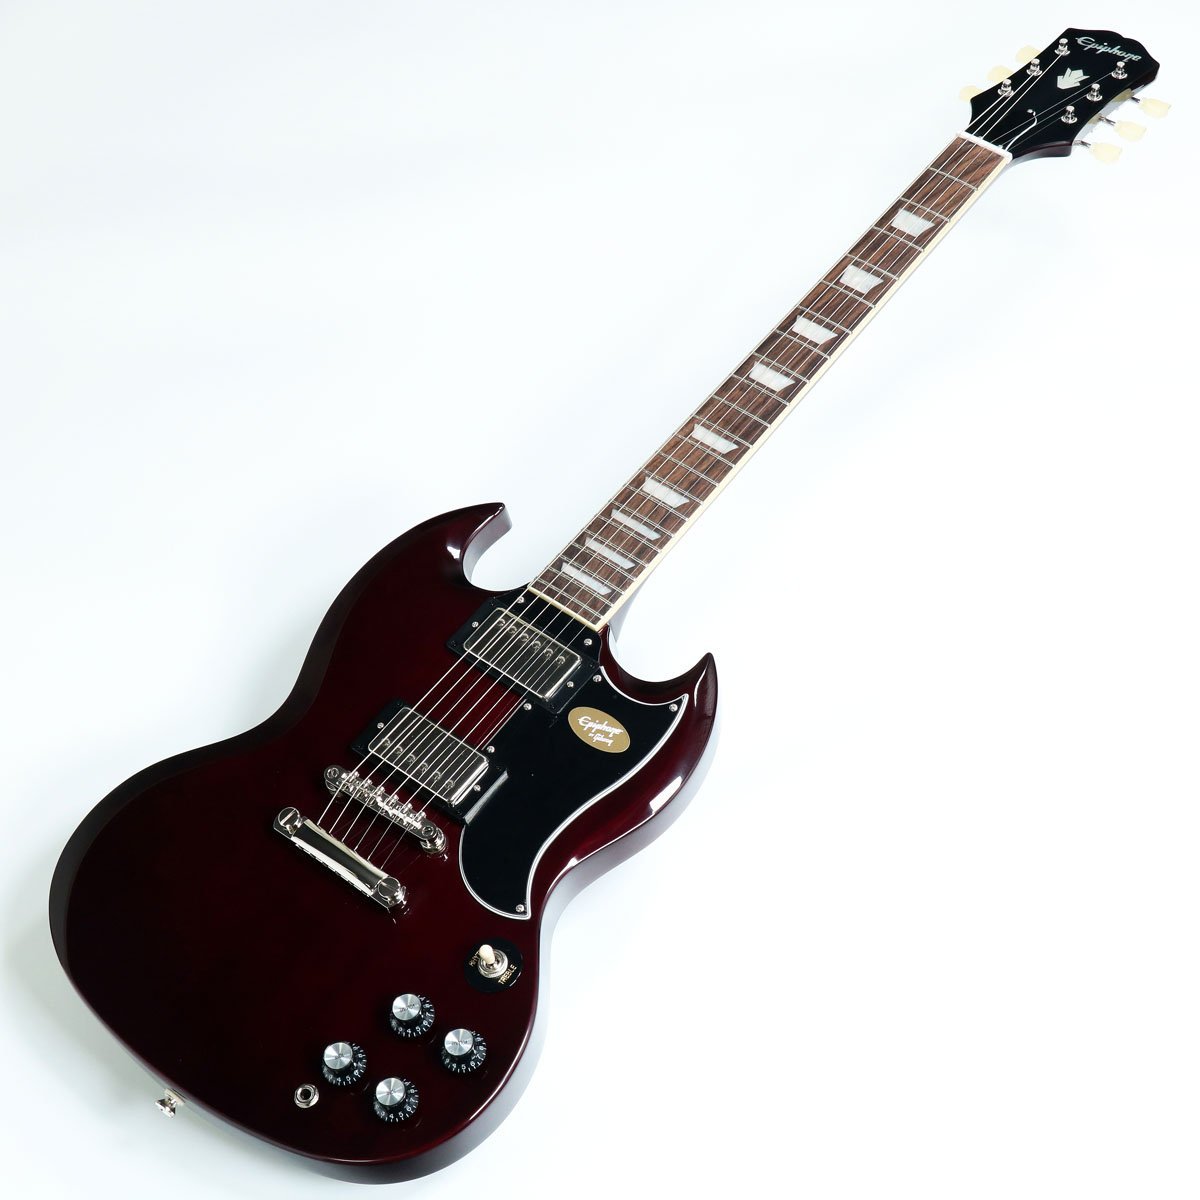 Epiphone Inspired by Gibson SG Standardボディタイプソリッド